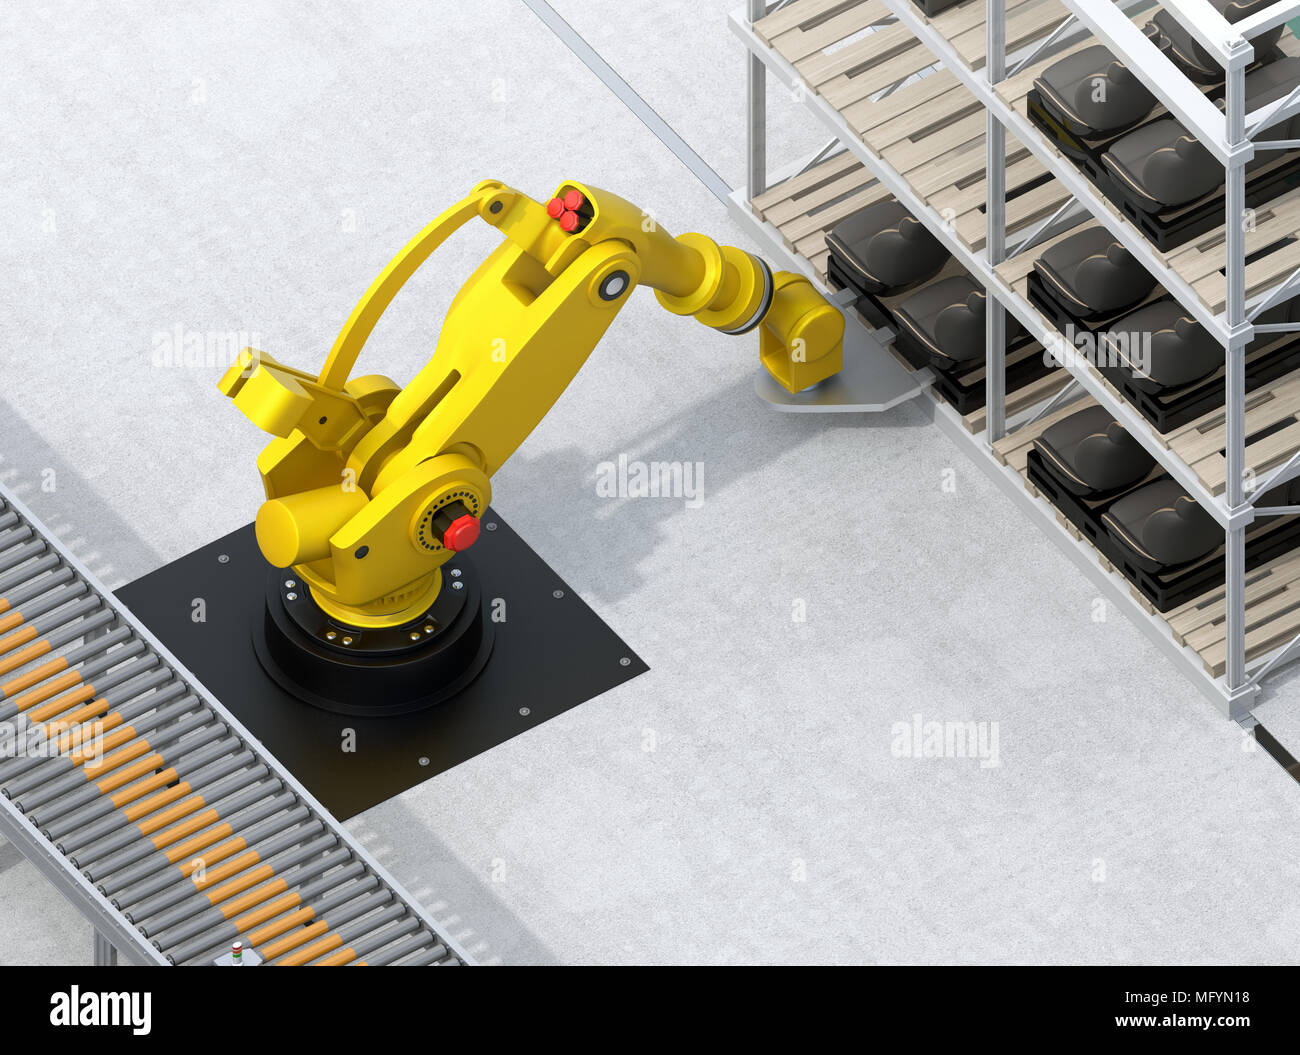 Heavyweight robotic arm carrying car seats in car assembly production line. 3D rendering image. Stock Photo